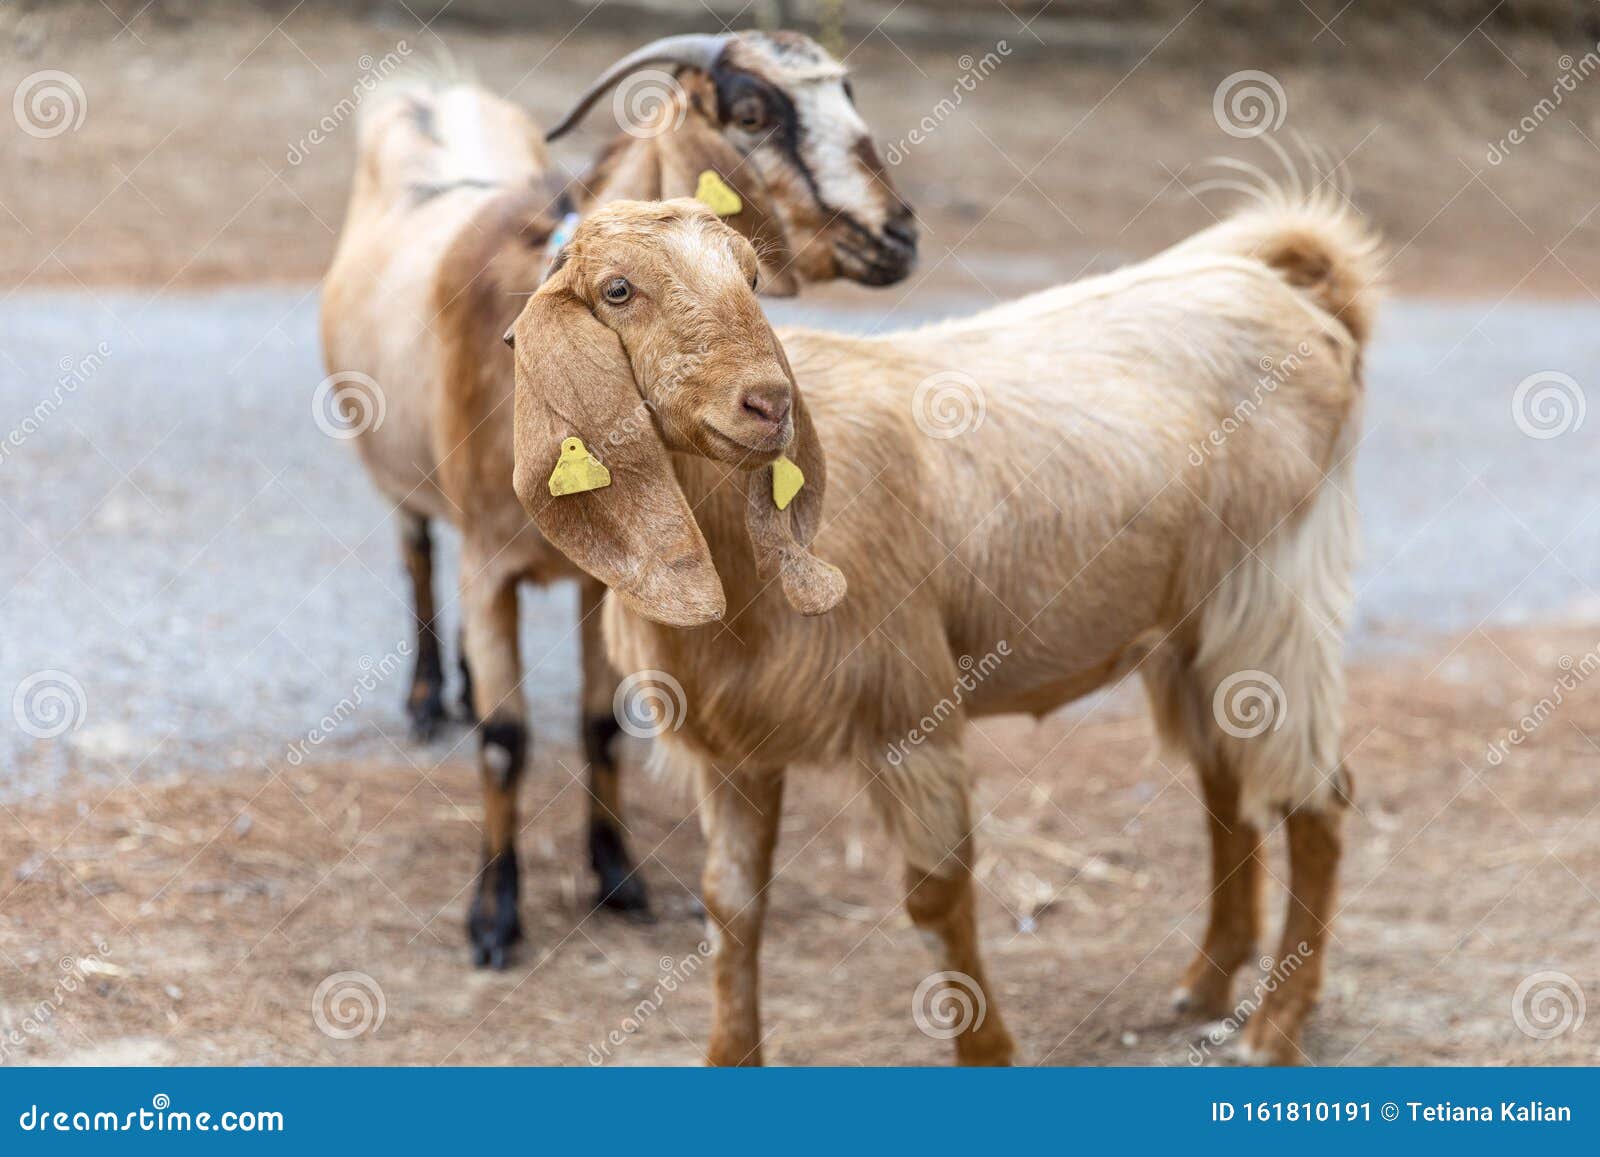 portrait of two anglo-nubian goats grazing in the mountains in northern cyprus. the curious animais are looking into camera